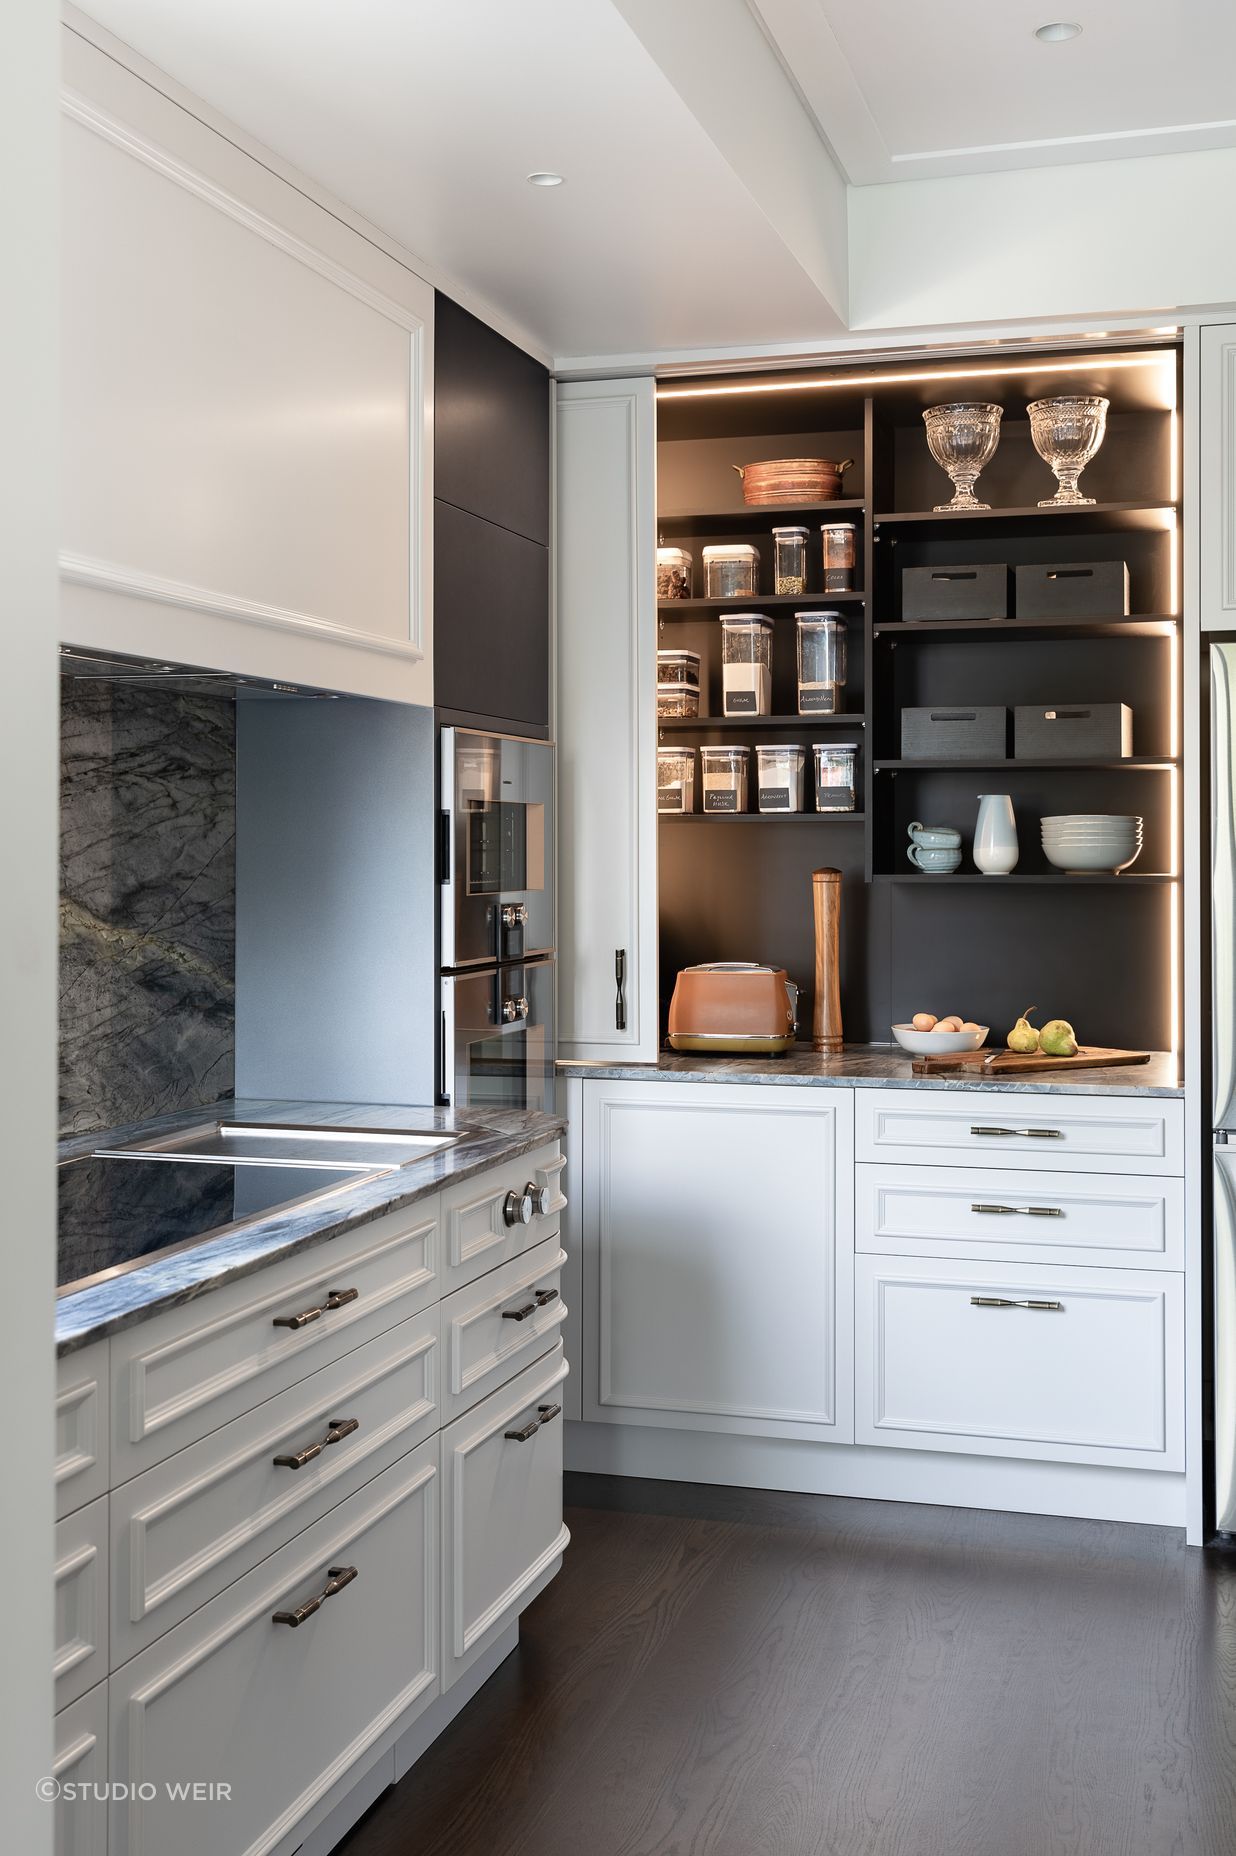 A generous pantry with deep benches hides small appliances inside.  Integrated vertical sensor lighting is incorporated here.